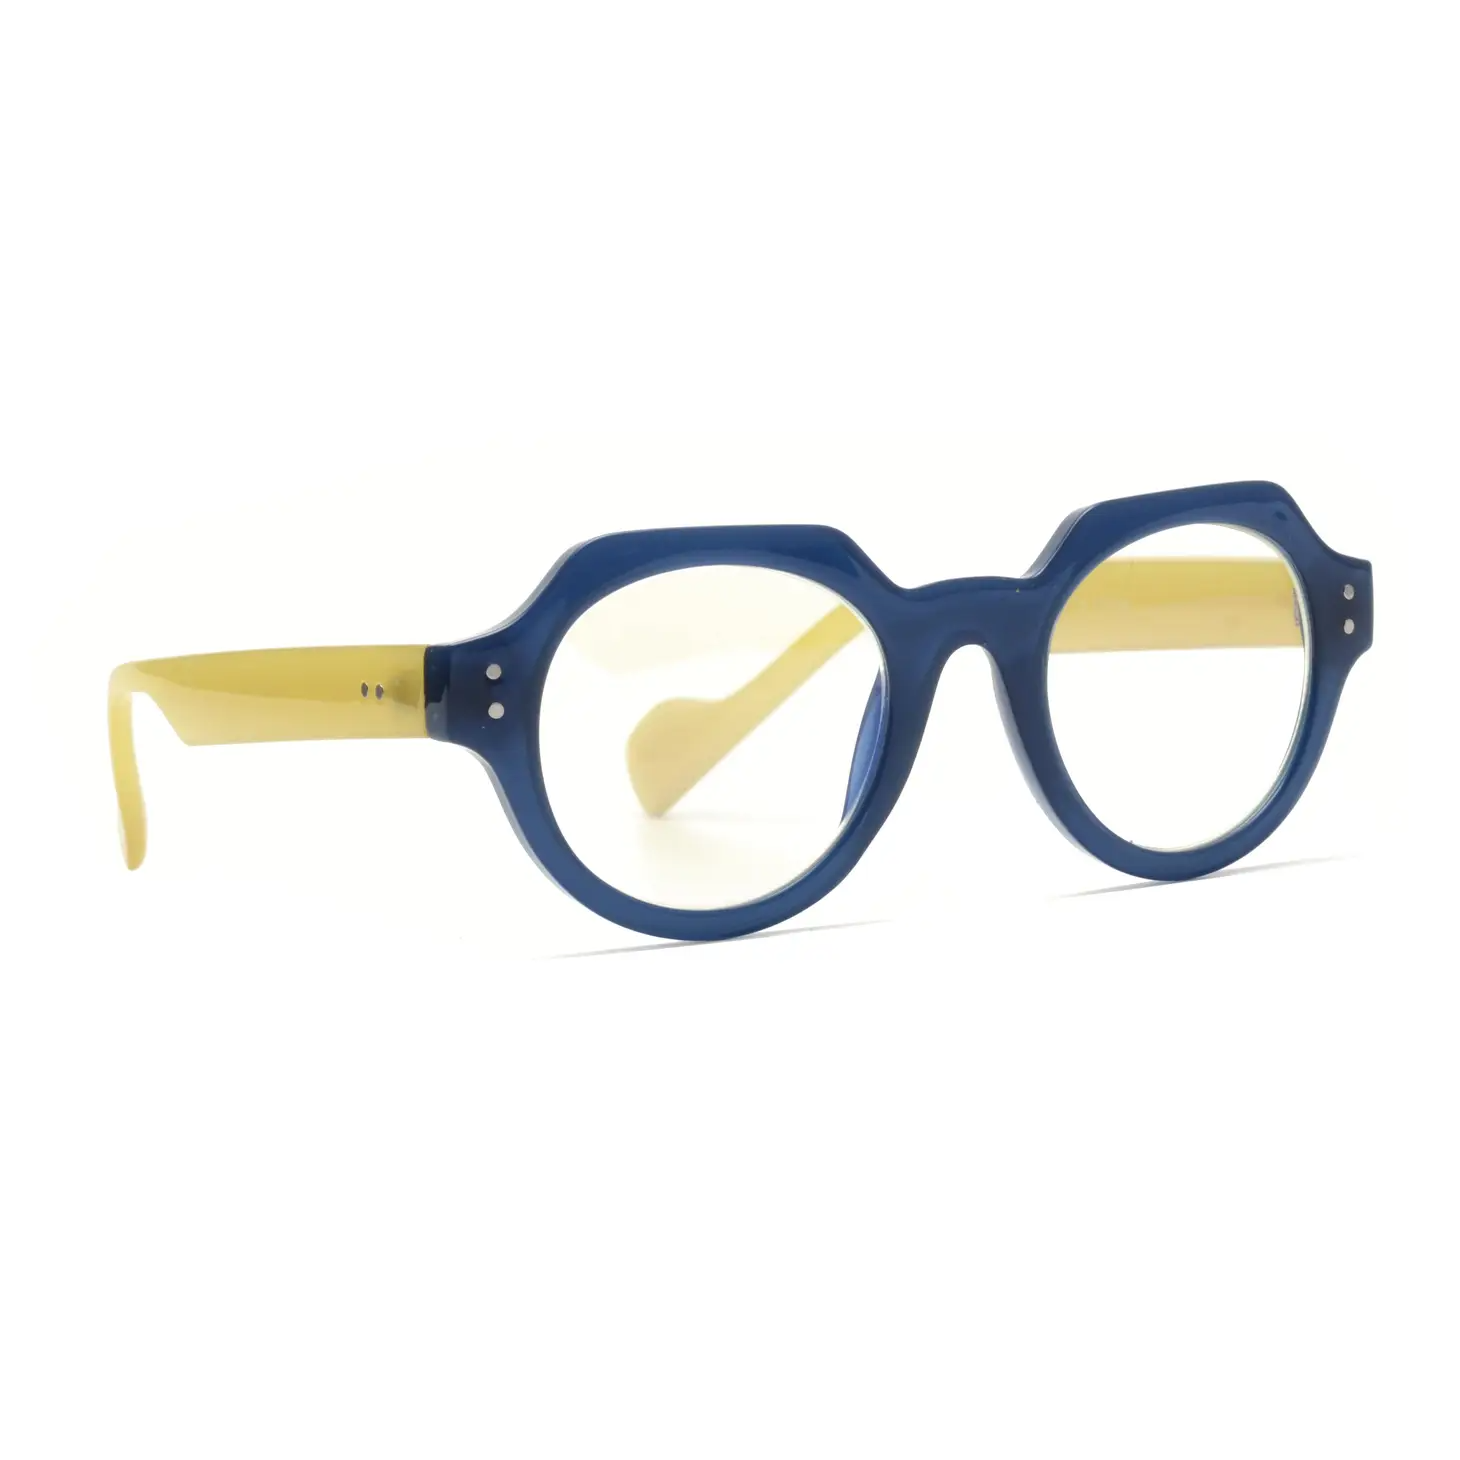 Blue Light Reading Glasses in Blue & Yellow - Home Works